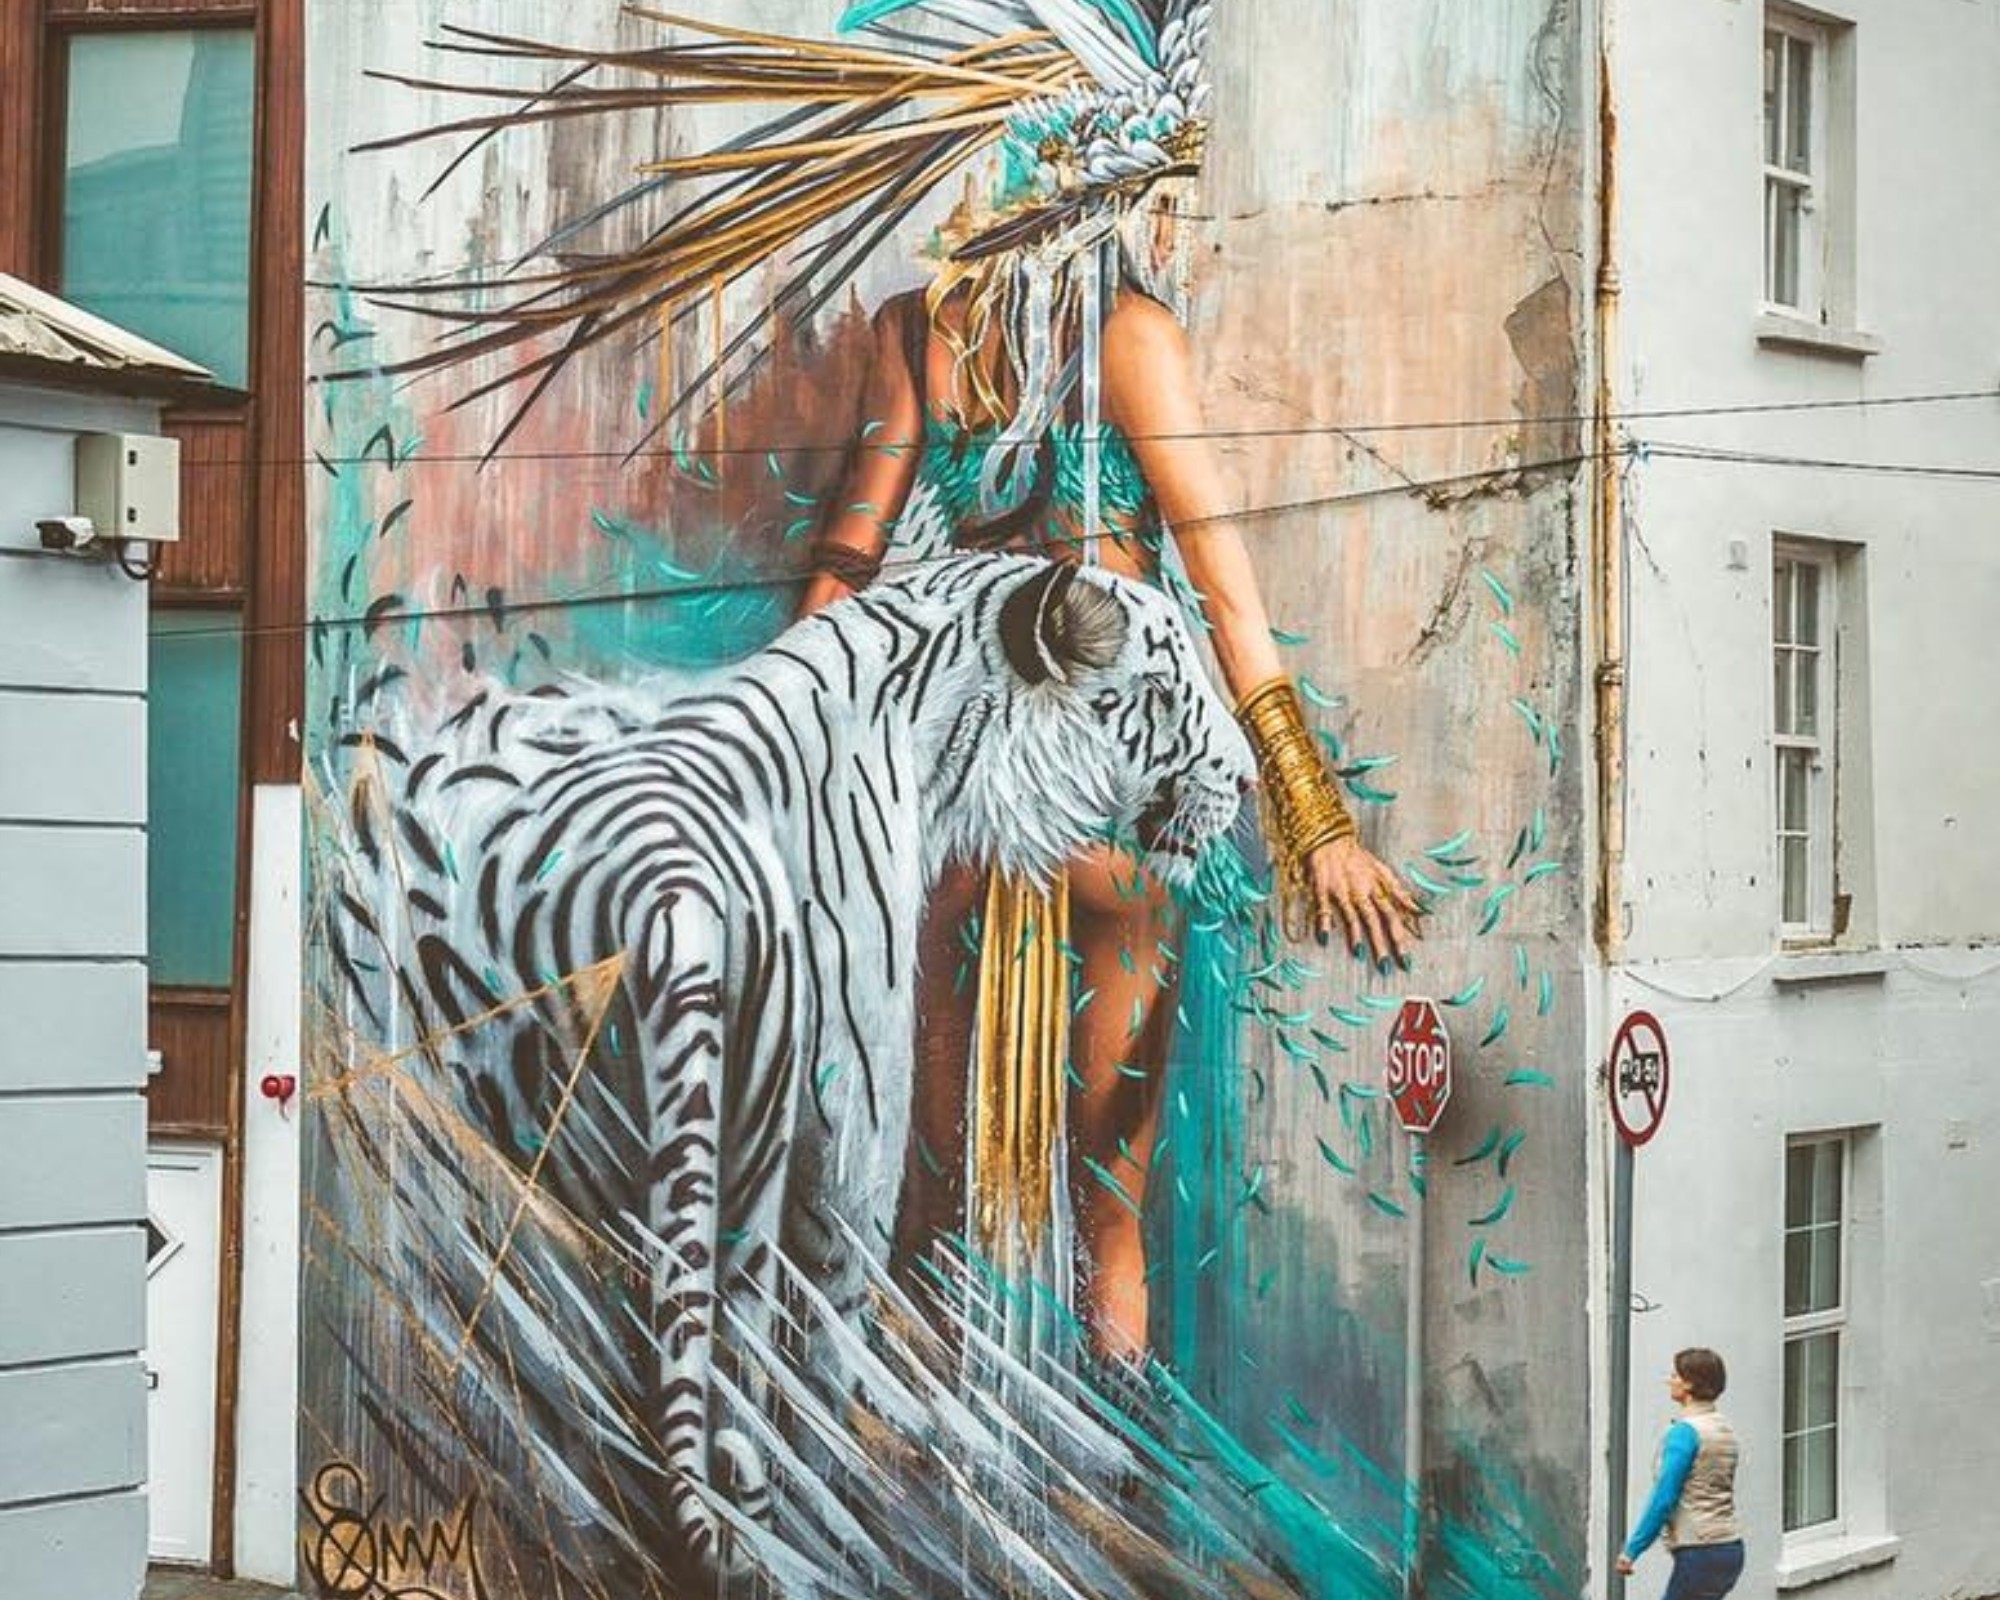 Sonny Street Art Mural of girl and white tiger painted in the streets of Ireland for Waterford Walls Festival 2018